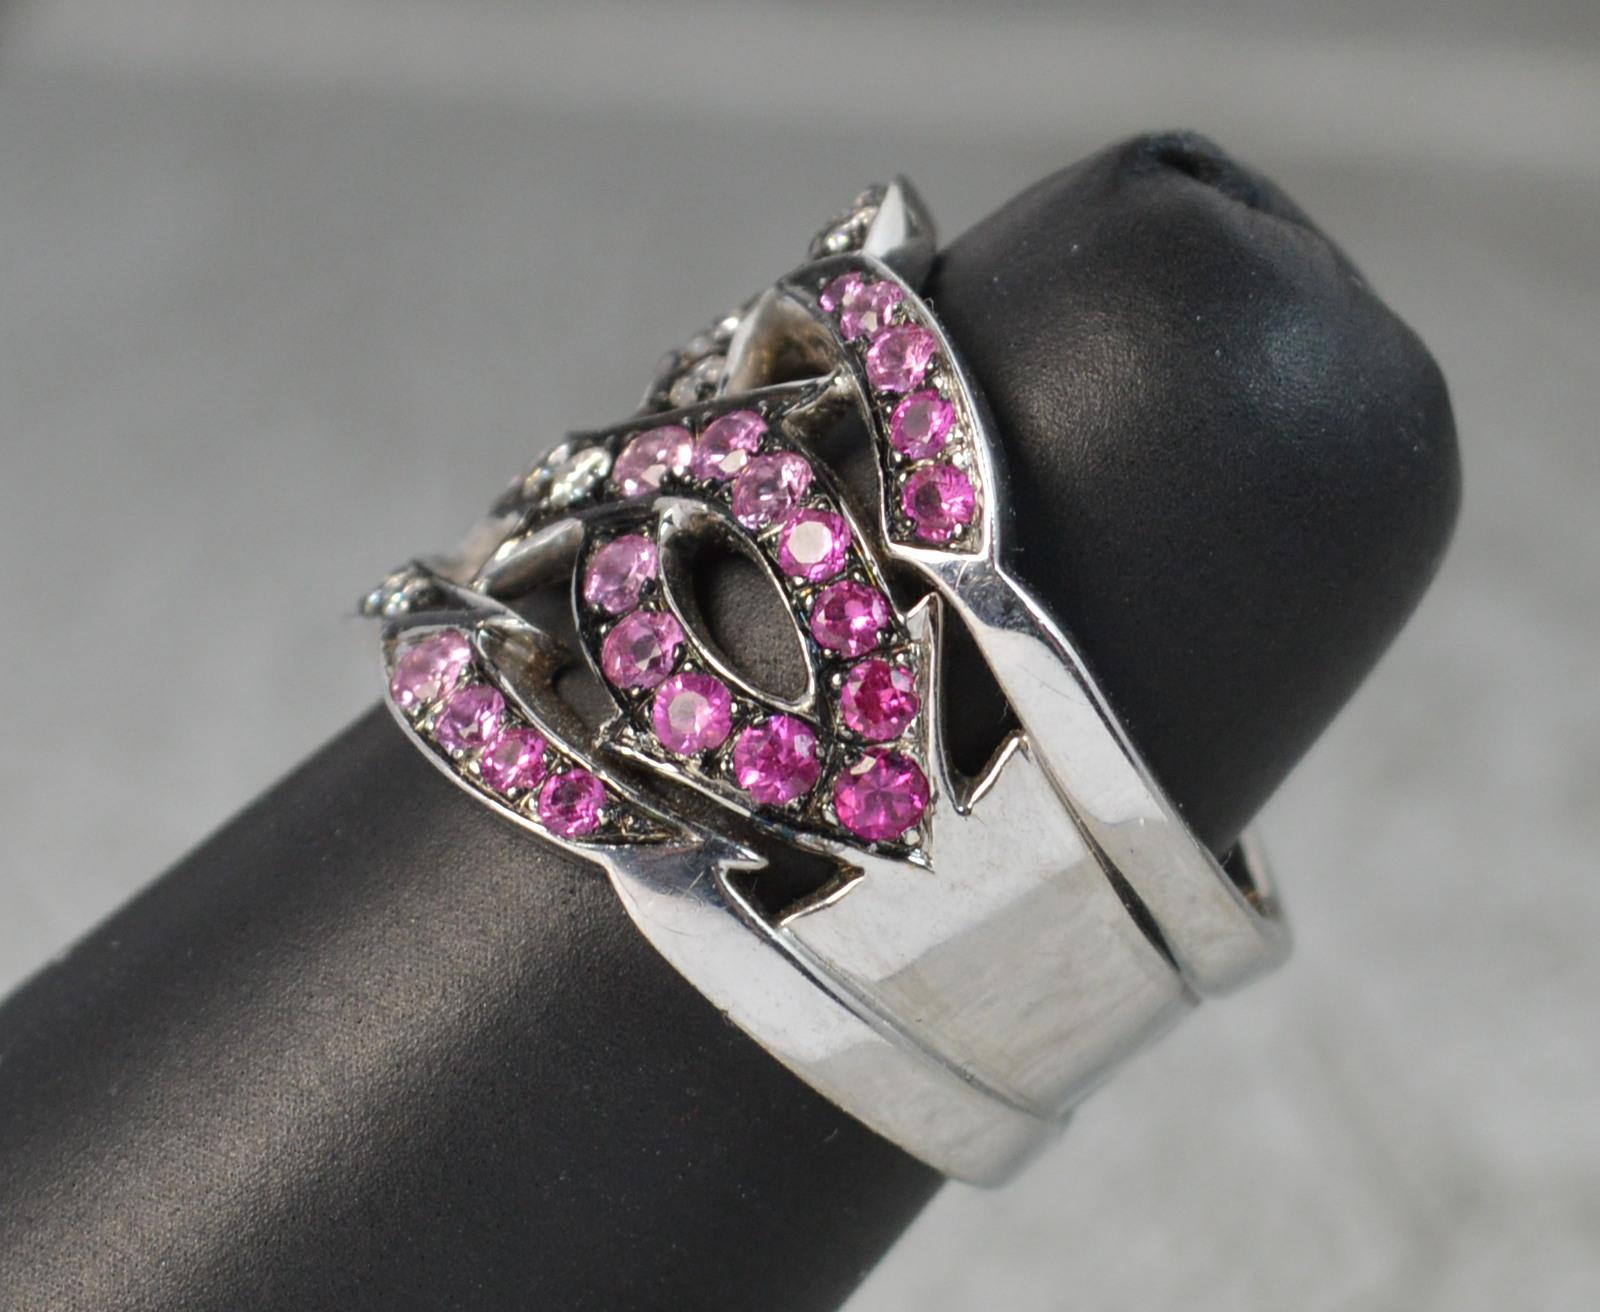 A very stylish Stephen Webster designer ring, part of the Tattoo range.
Solid and heavy 18 carat white gold example.
The front designed with graduated colour pink sapphires and white diamonds in blackened grain settings. Striking shape and impact.